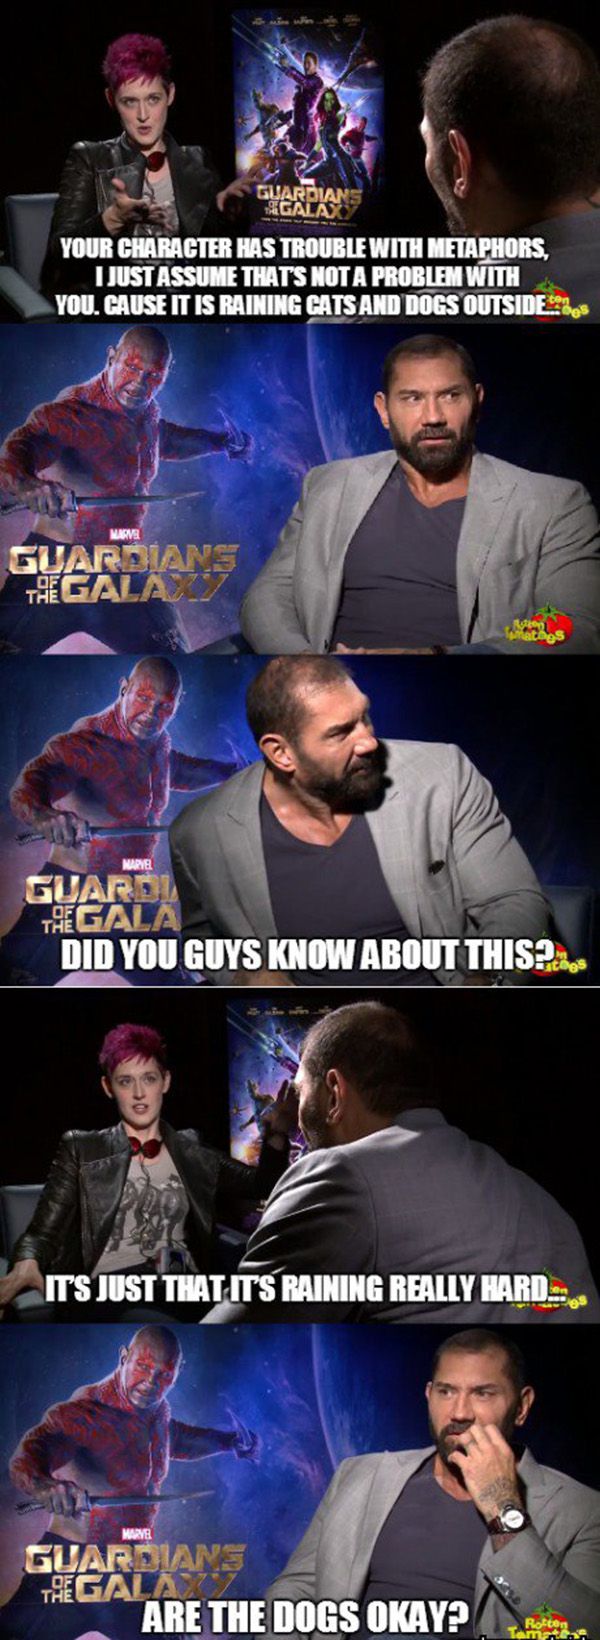 avengers 5 memes - Guardian &Galas Your Character Has Trouble With Metaphors. I Just Assume Thats Not A Problem With You. Cause It Is Raining Cats And Dogs Outside Guardians The Galaxy 9 Guarol Taegala Did You Guys Know About This? It'S Just That It'S Rai